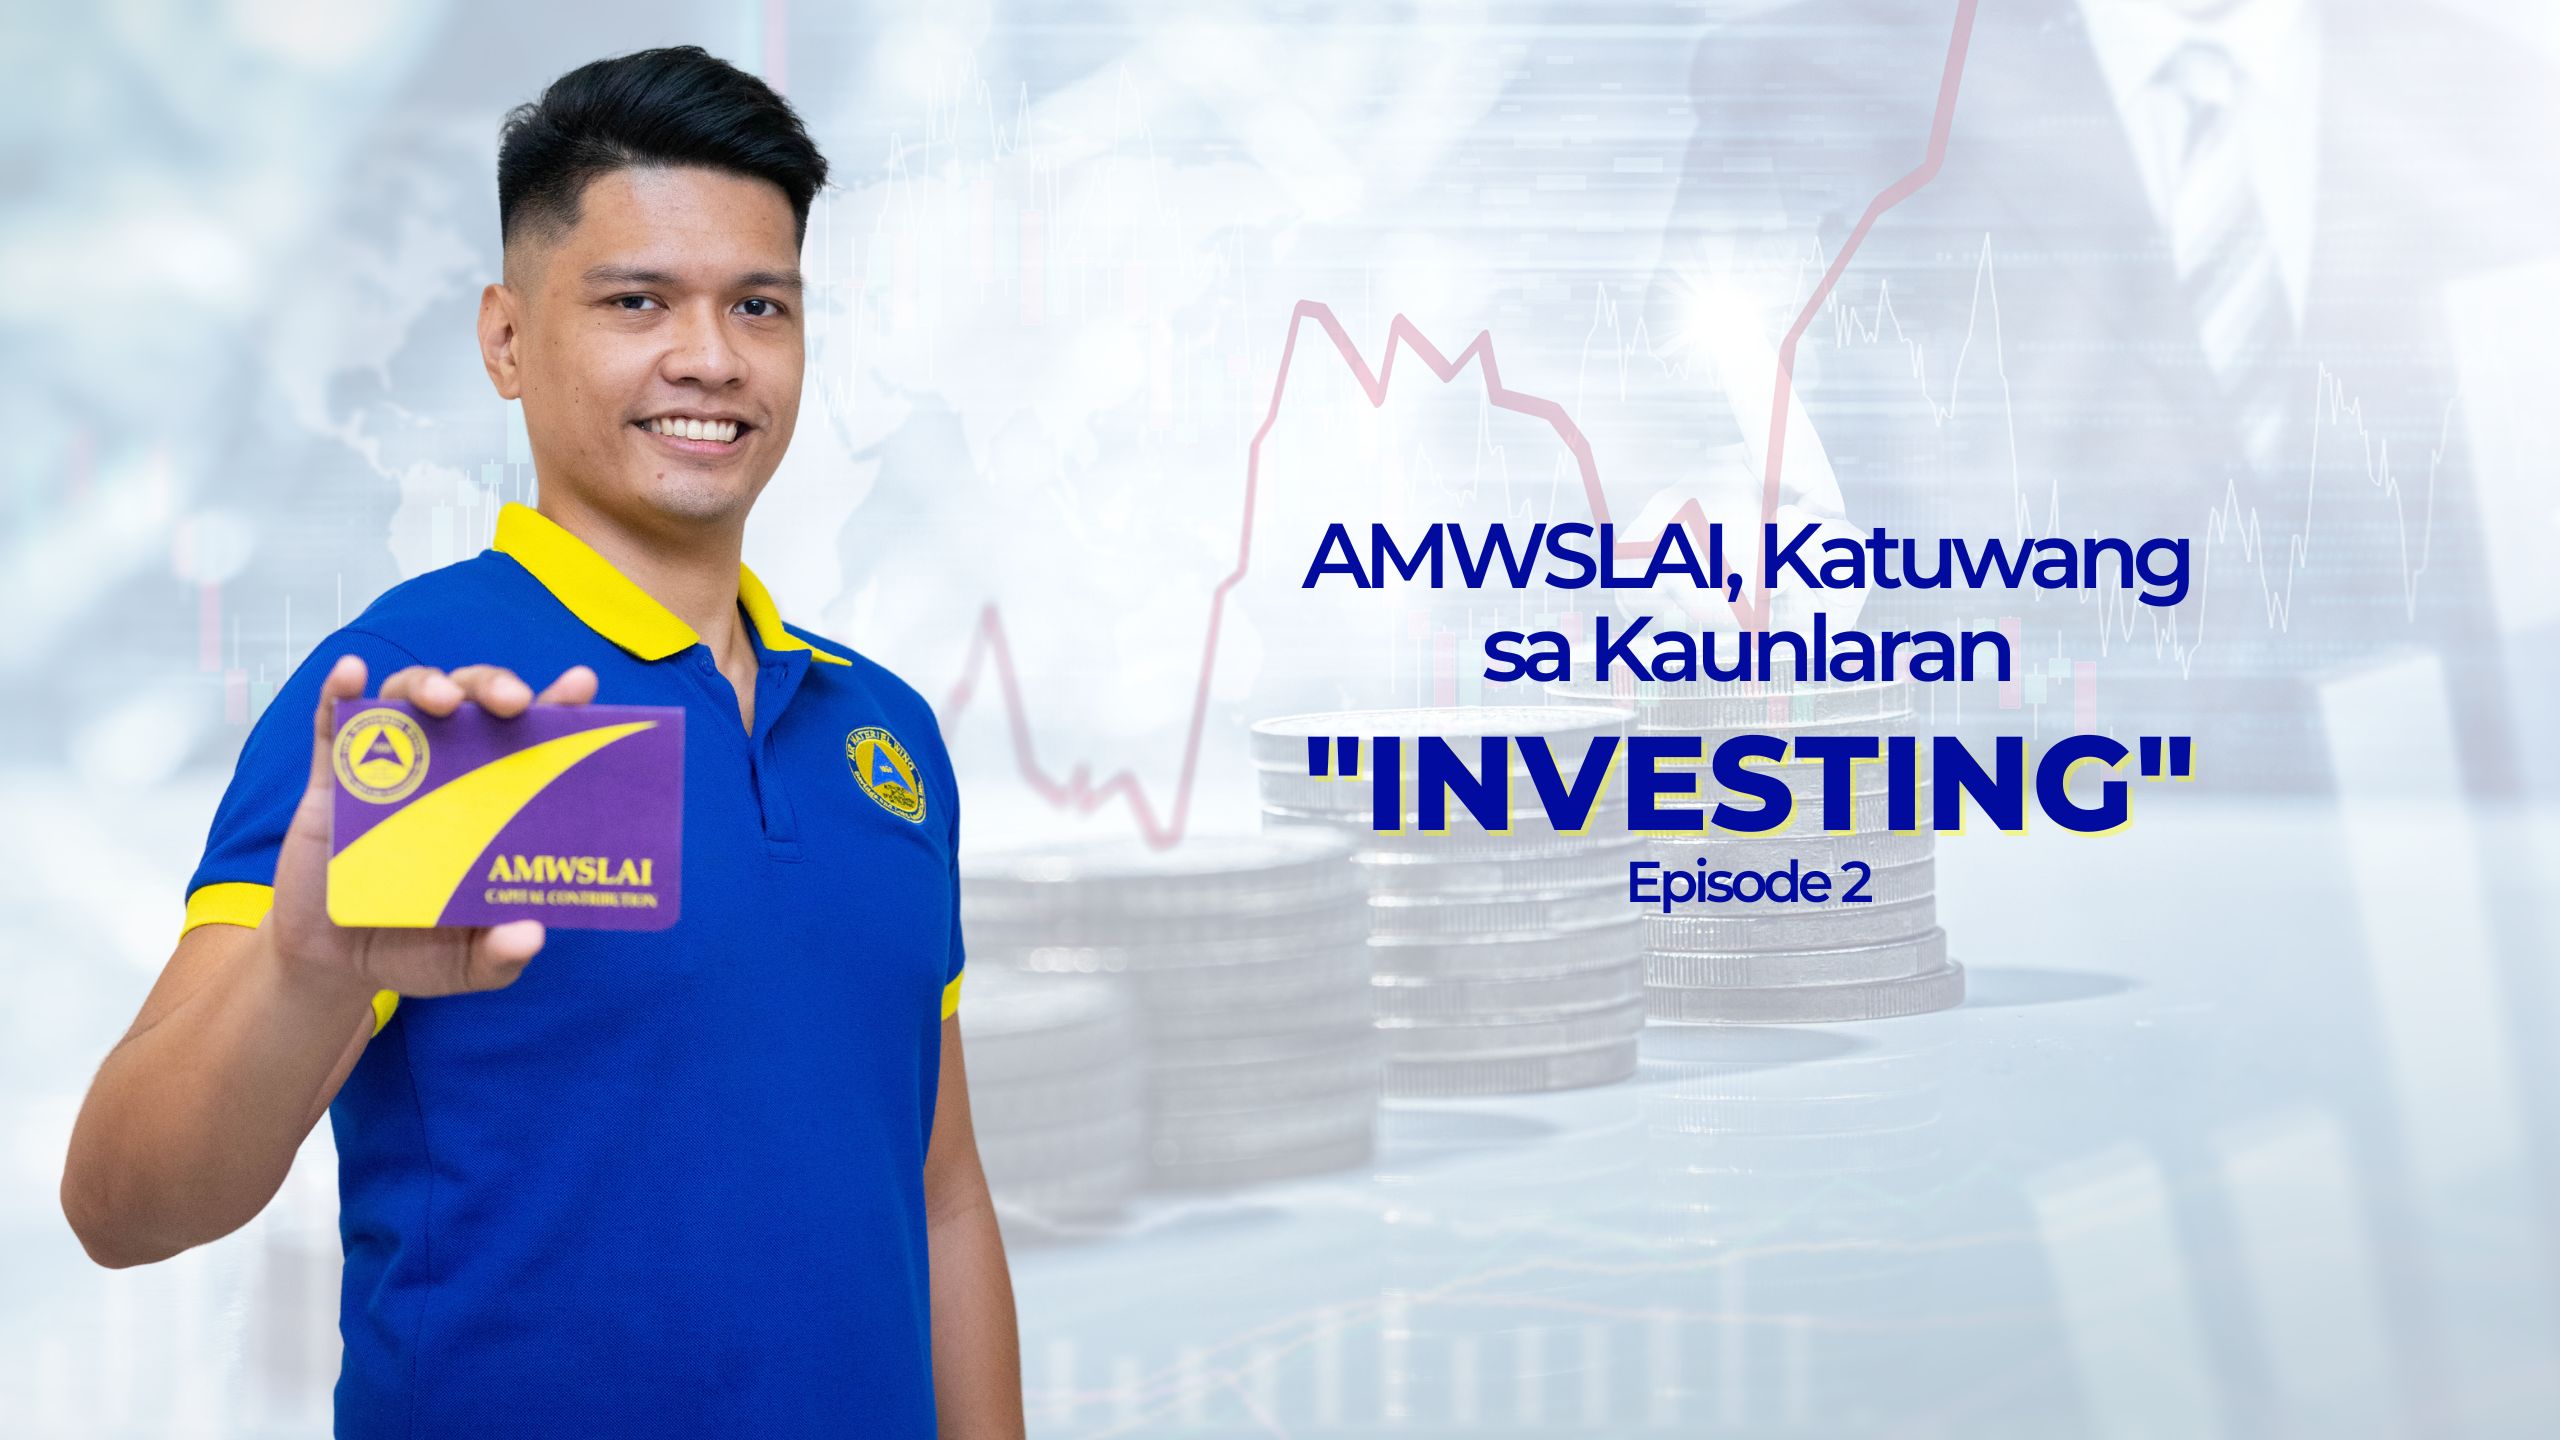 segment about investing